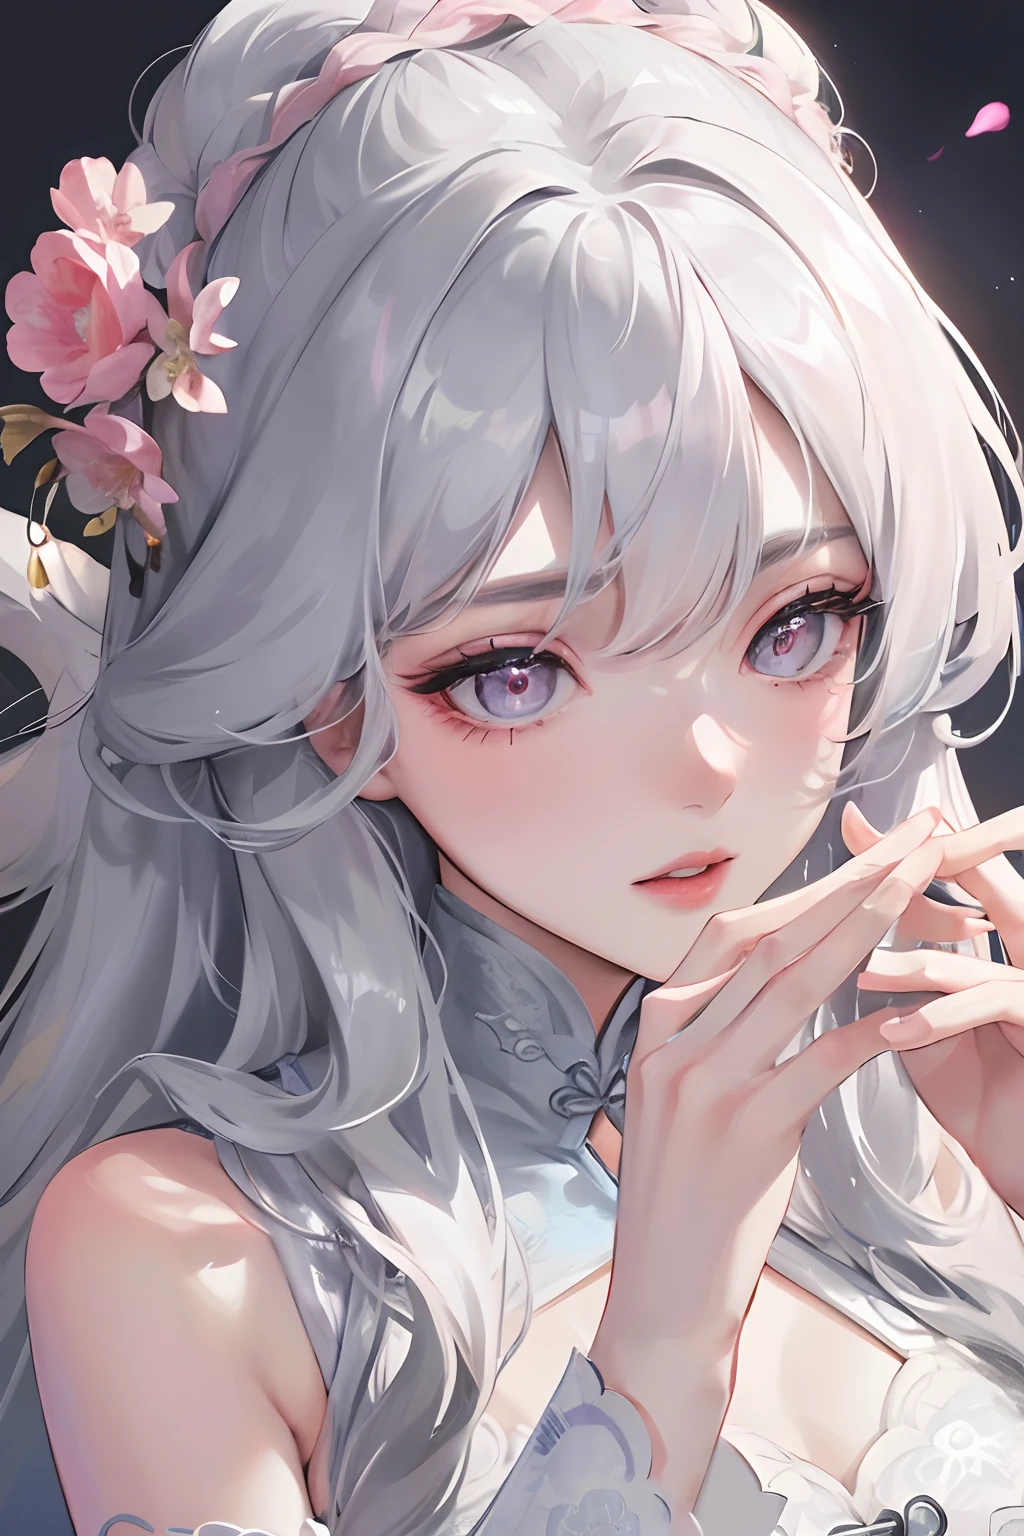 8K, masterpiece, best quality, night, full moon, 1 girl, Chinese style, Chinese architecture, mature woman, sister, silver white long haired woman, long hair, light pink lips, calm, rational, bangs, gray pupils, floral background, petal dancing, delicate face, delicate hands, close up